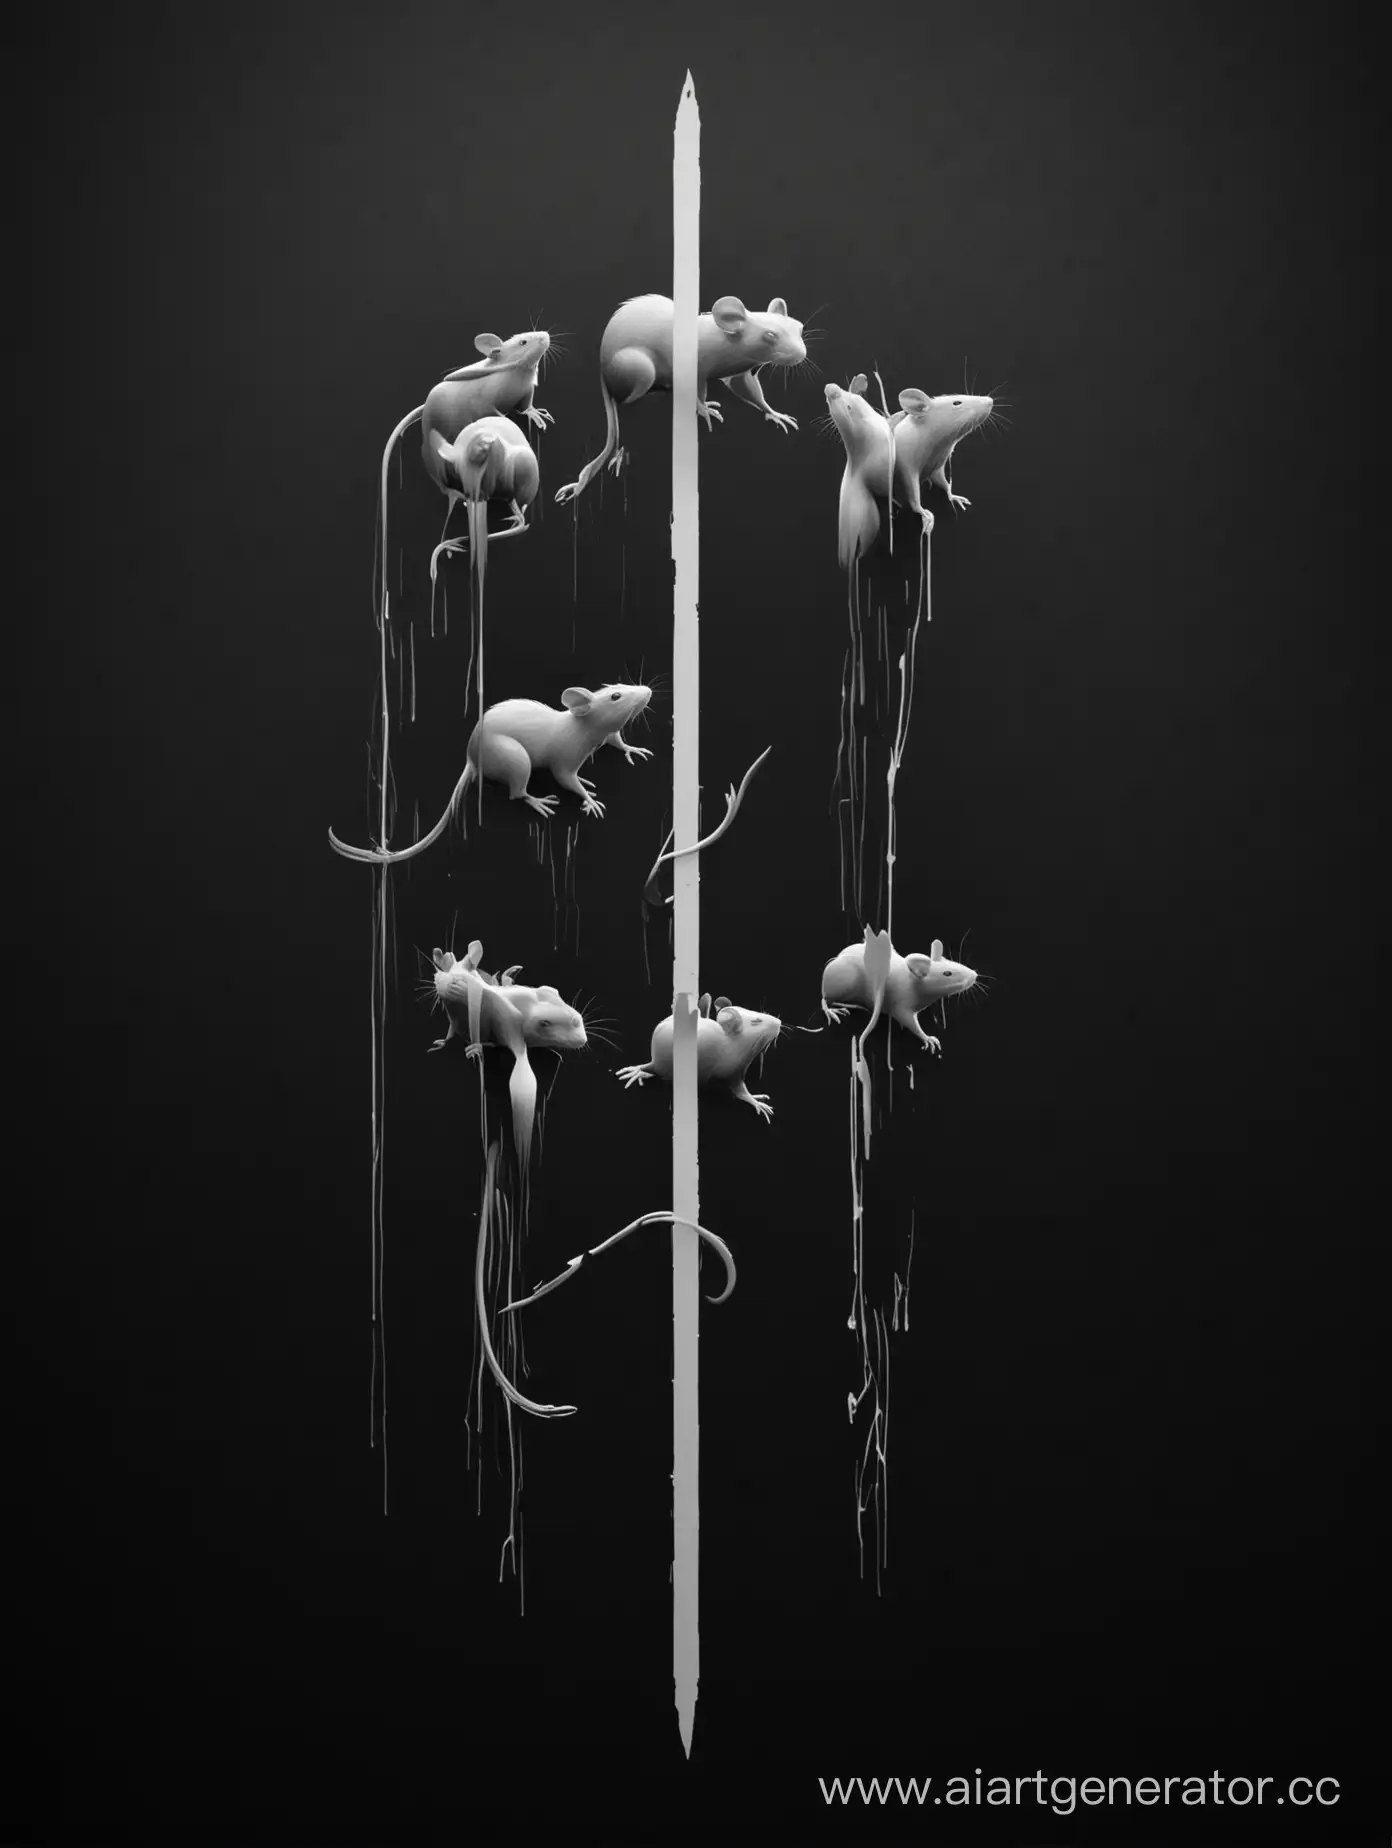 Minimalist-Silhouette-Rats-in-Totem-Style-on-Black-Background